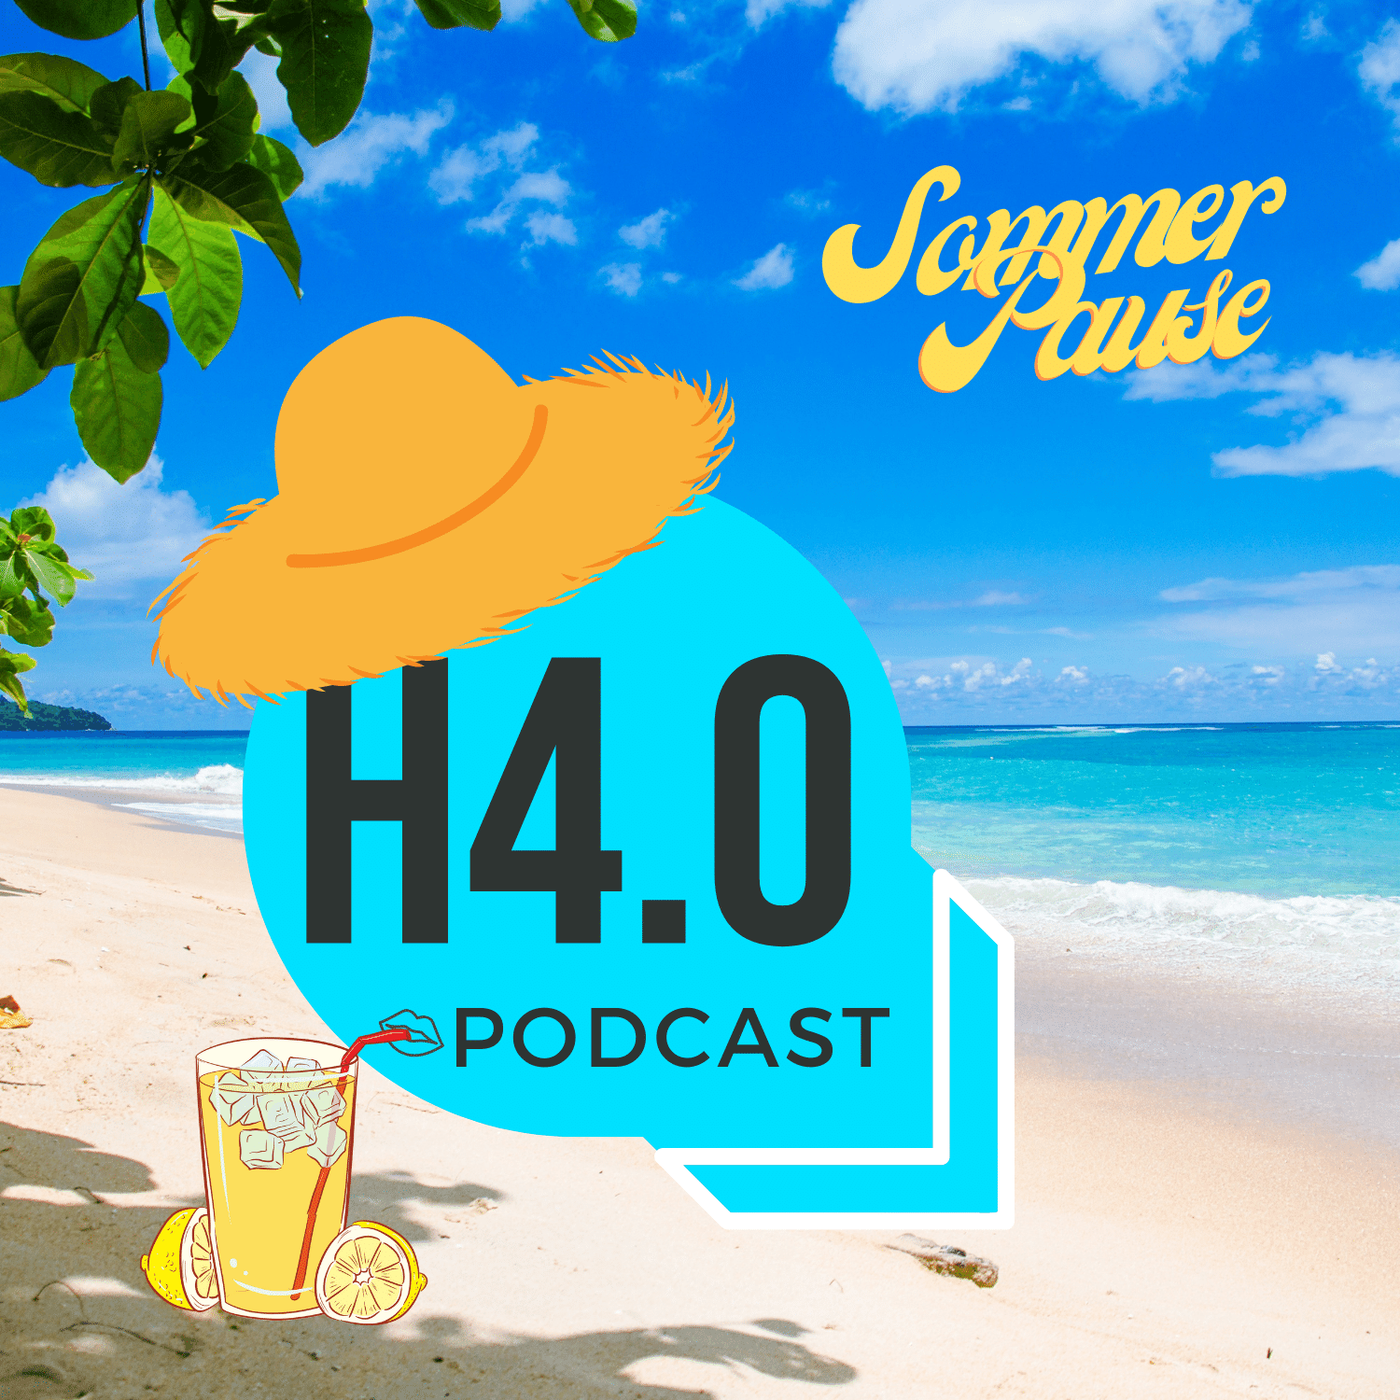 #114 E-Commerce Sommerpause mit Shopware  ☀️🍹